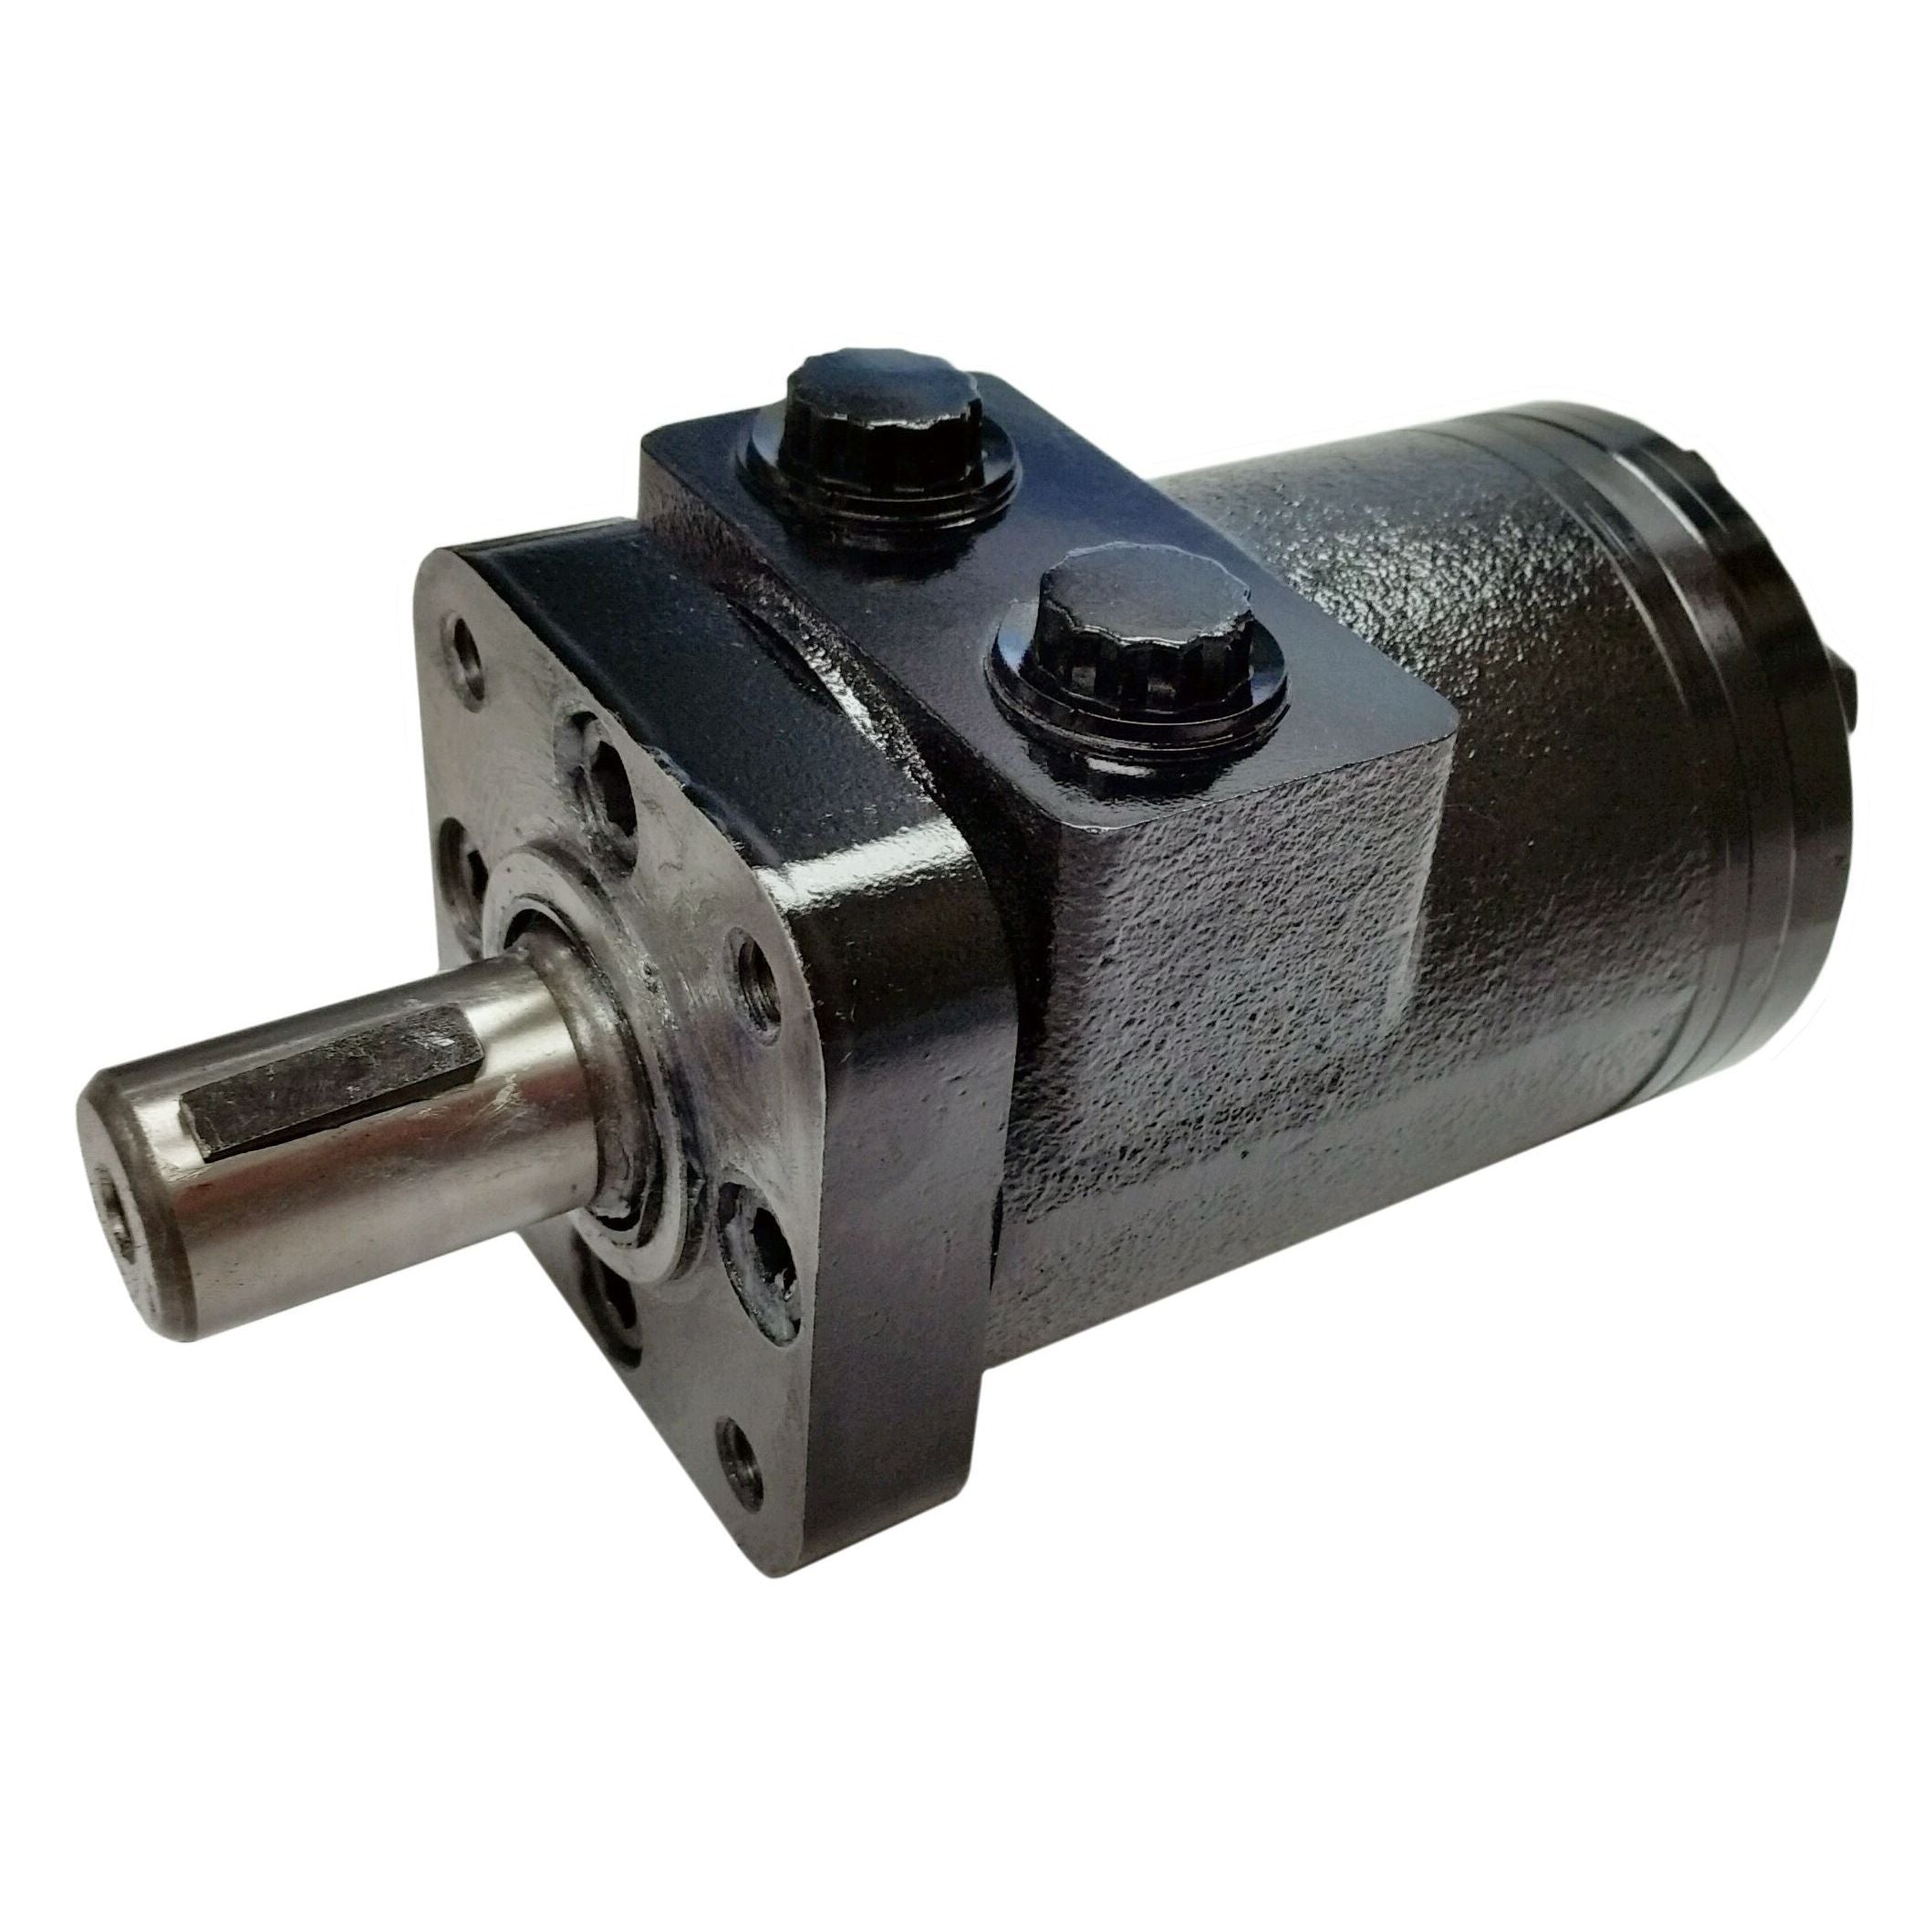 BMPH-100-H4-S-P : Dynamic LSHT Motor, 96.2cc, 615RPM, 1611in-lb, 2031psi Differential, 15.85GPM, SAE A 4-Bolt Mount, 6-Tooth Shaft, Side Ported, 1/2" NPT